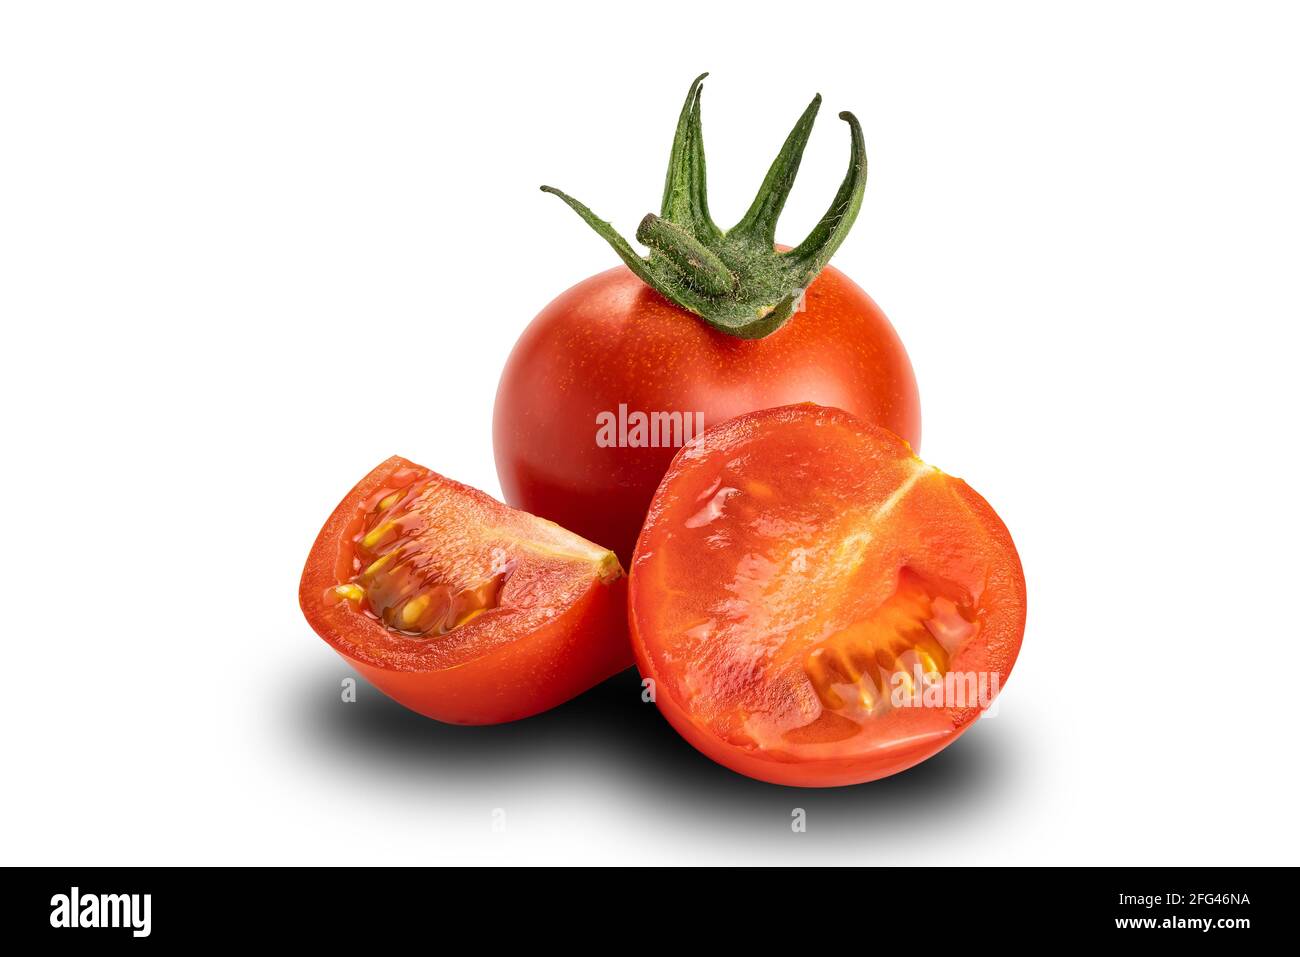 Side view of ripe a whole, a half and a piece of ripe cherry tomato on white background. Tomatoes or Solanum lycopersicum or lycopersicon esculentum a Stock Photo